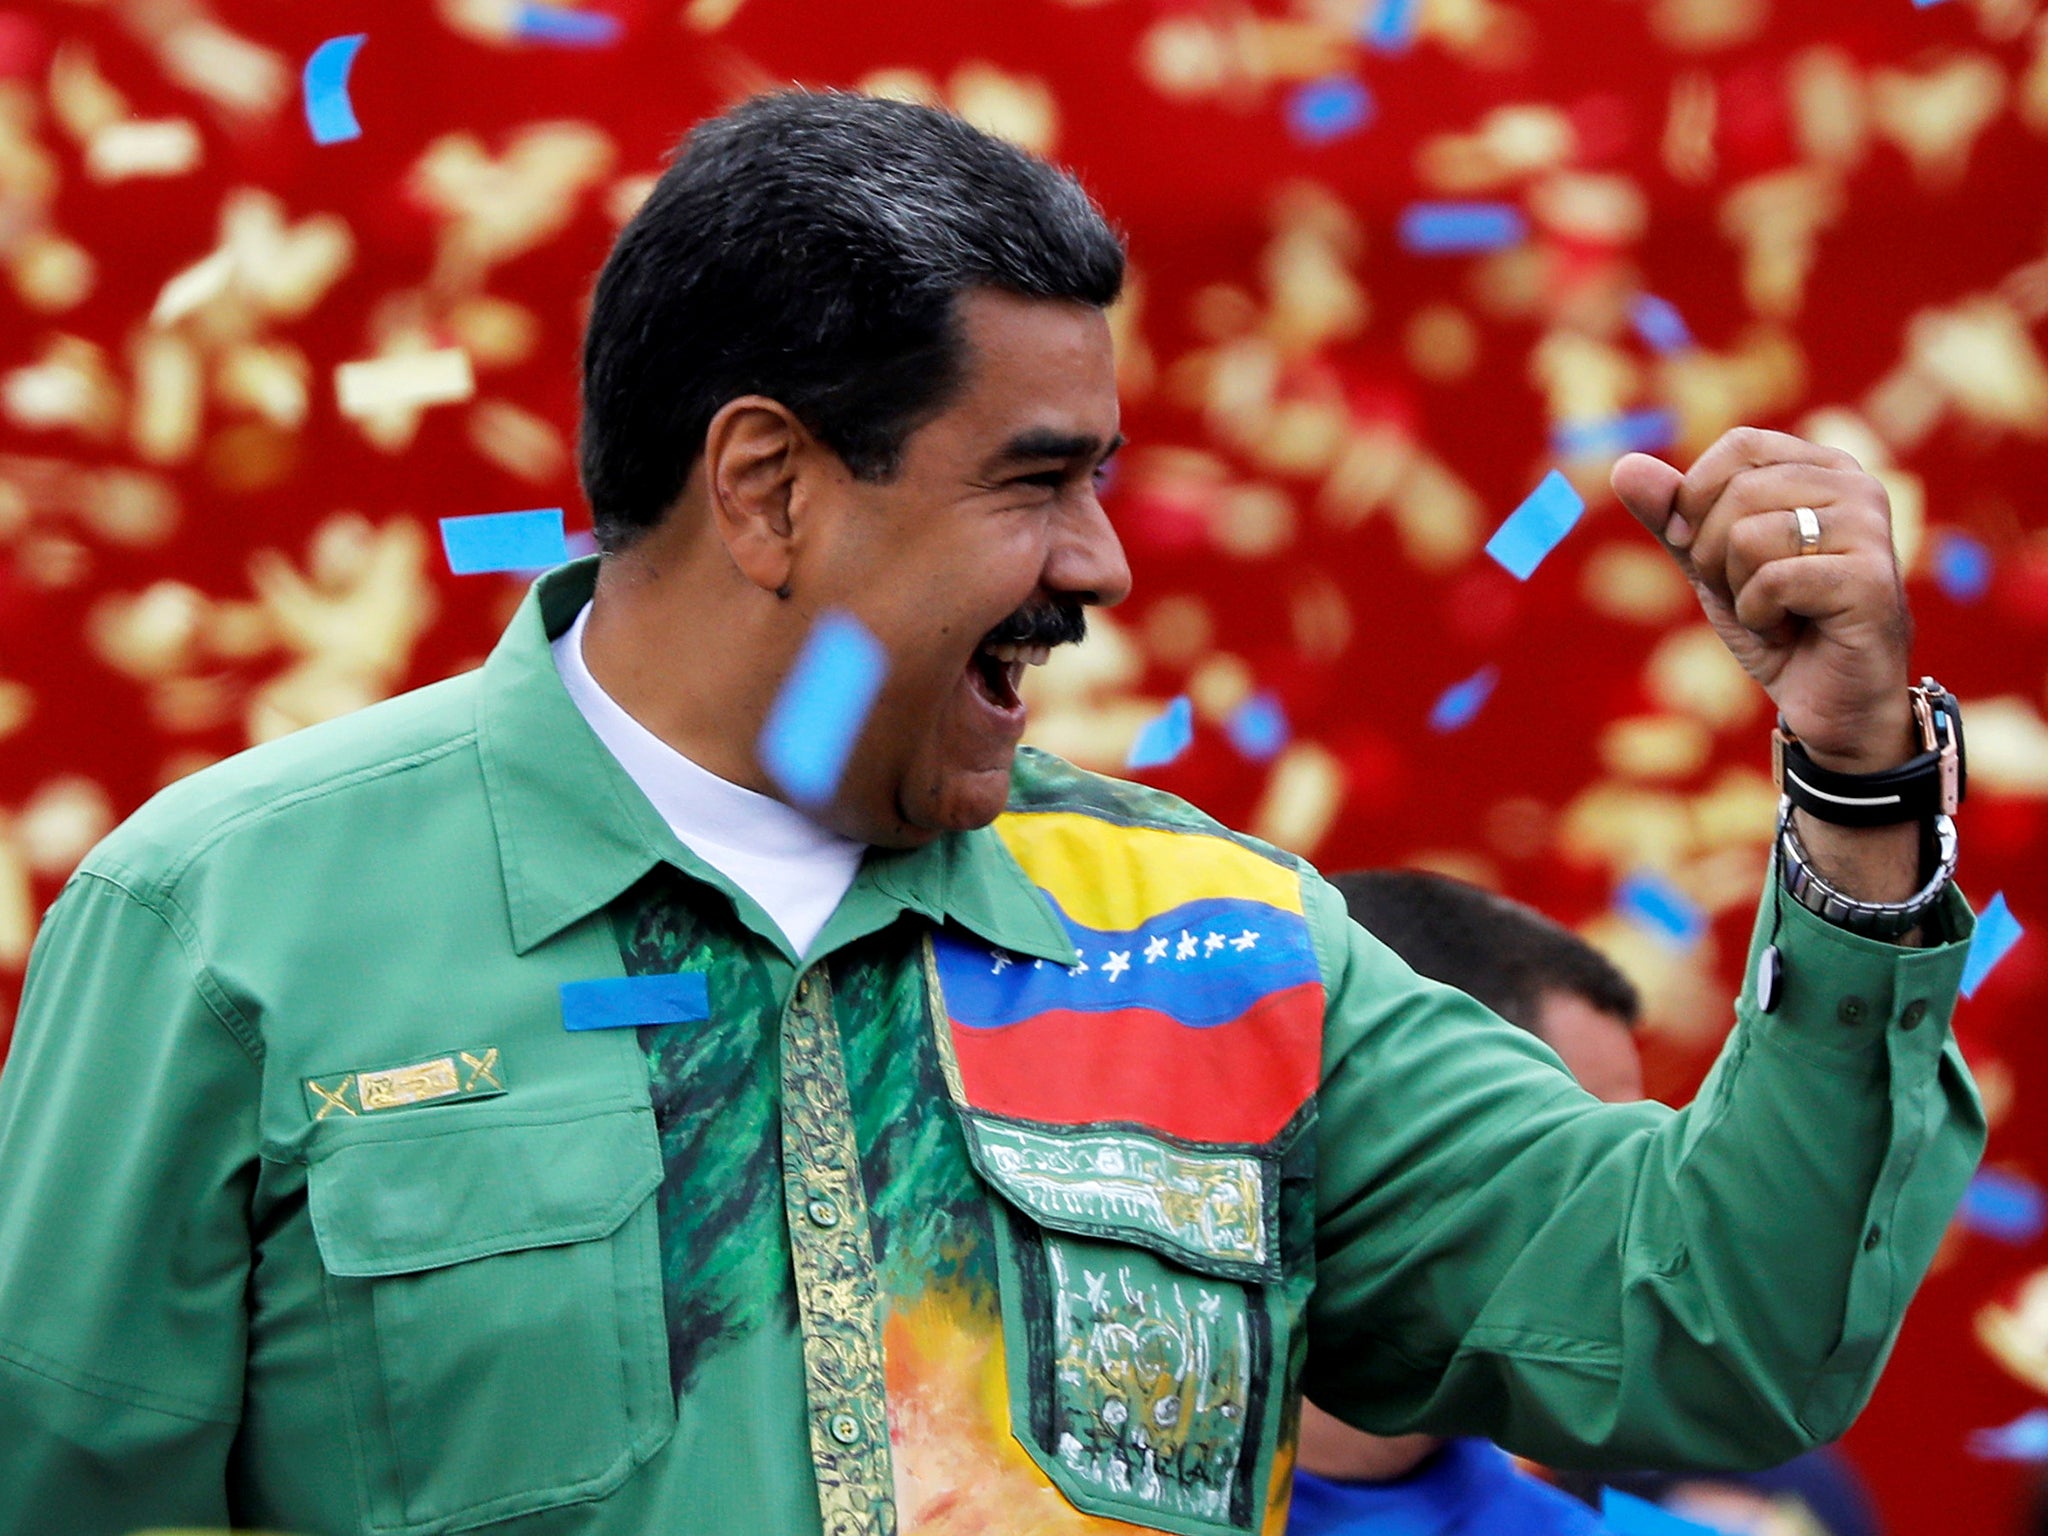 Venezuela’s president may well have won but faces new international sanctions